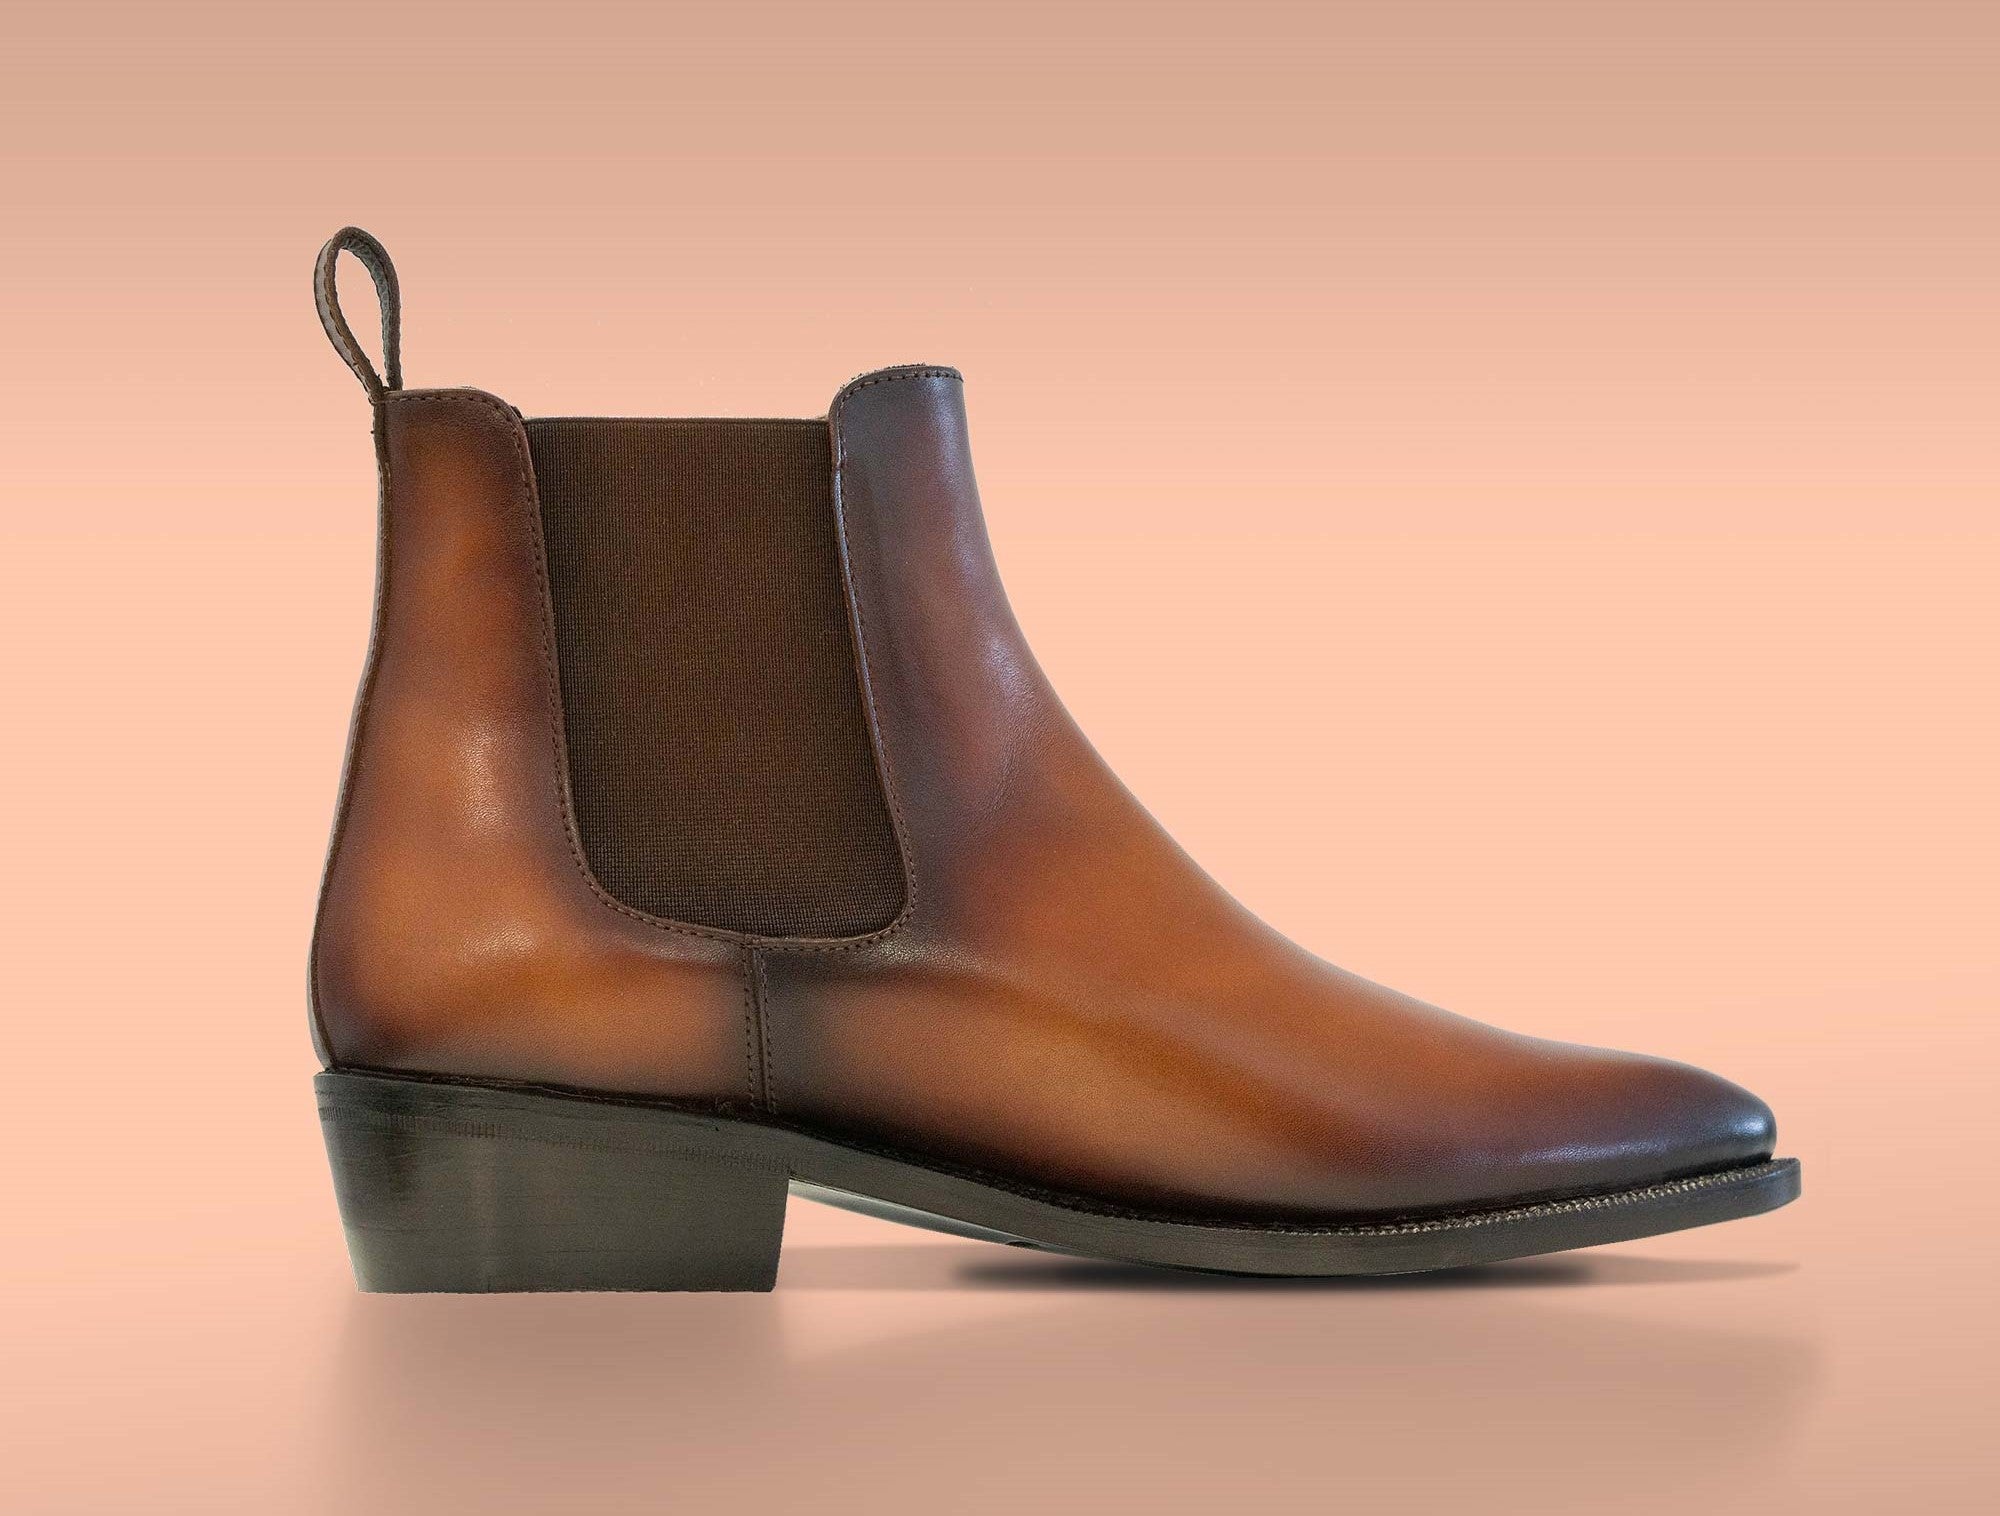 Introducing the New Pitched Heel